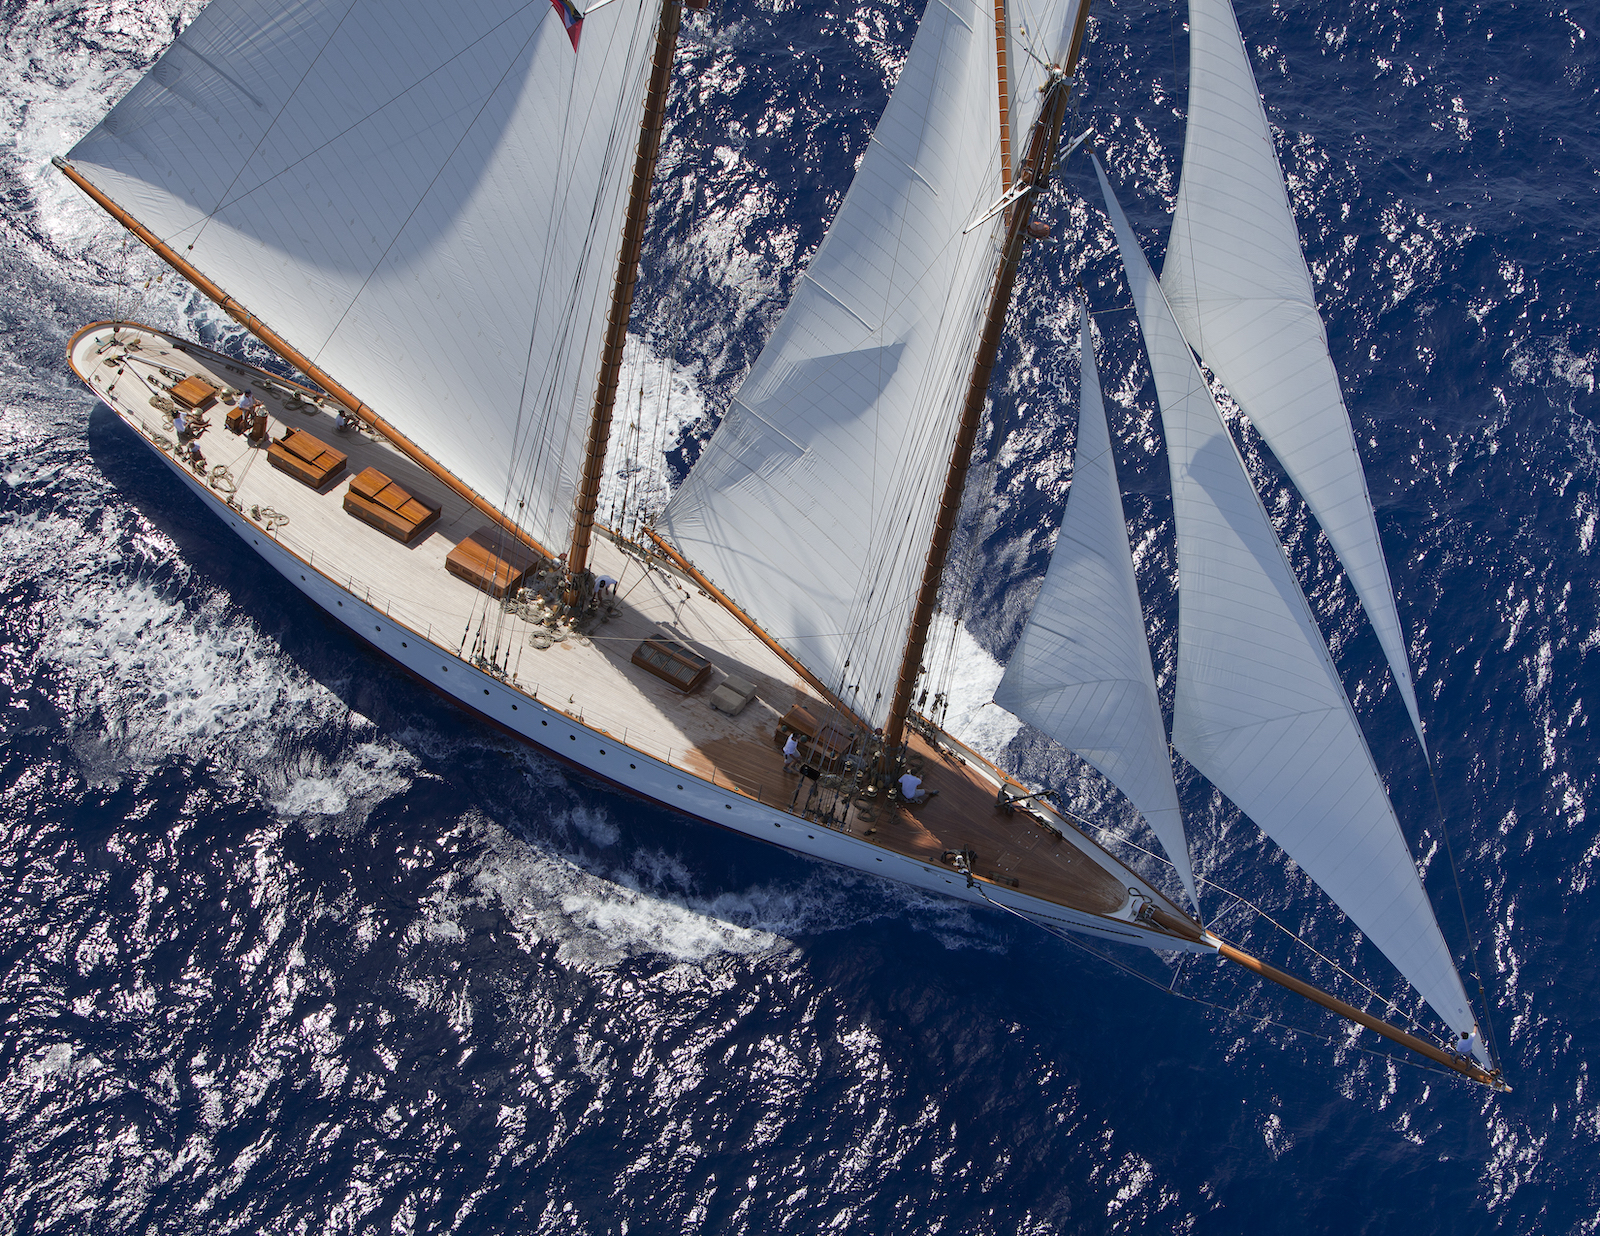 classic sailing yachts for charter